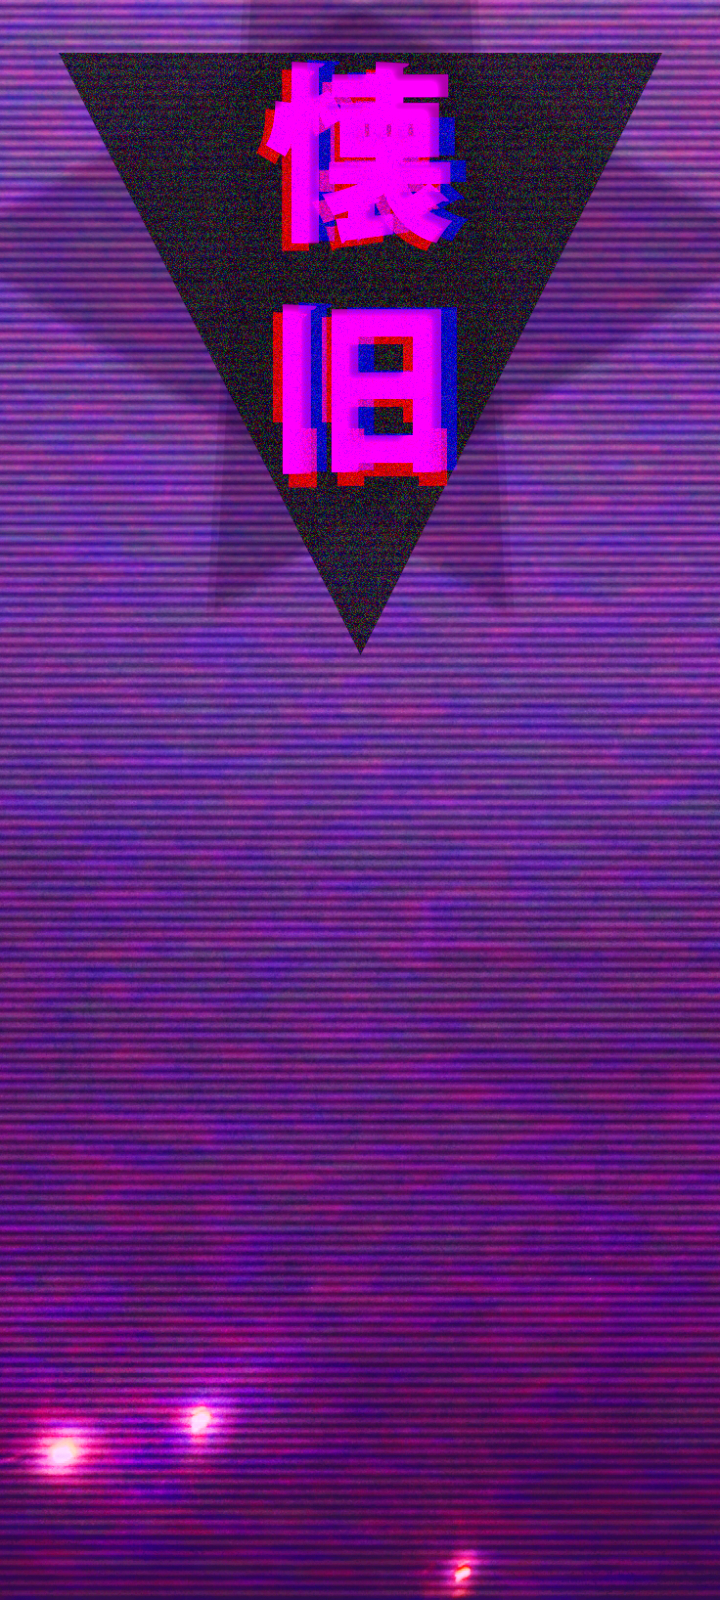 A purple and pink colored poster with the number 18 - Glitch